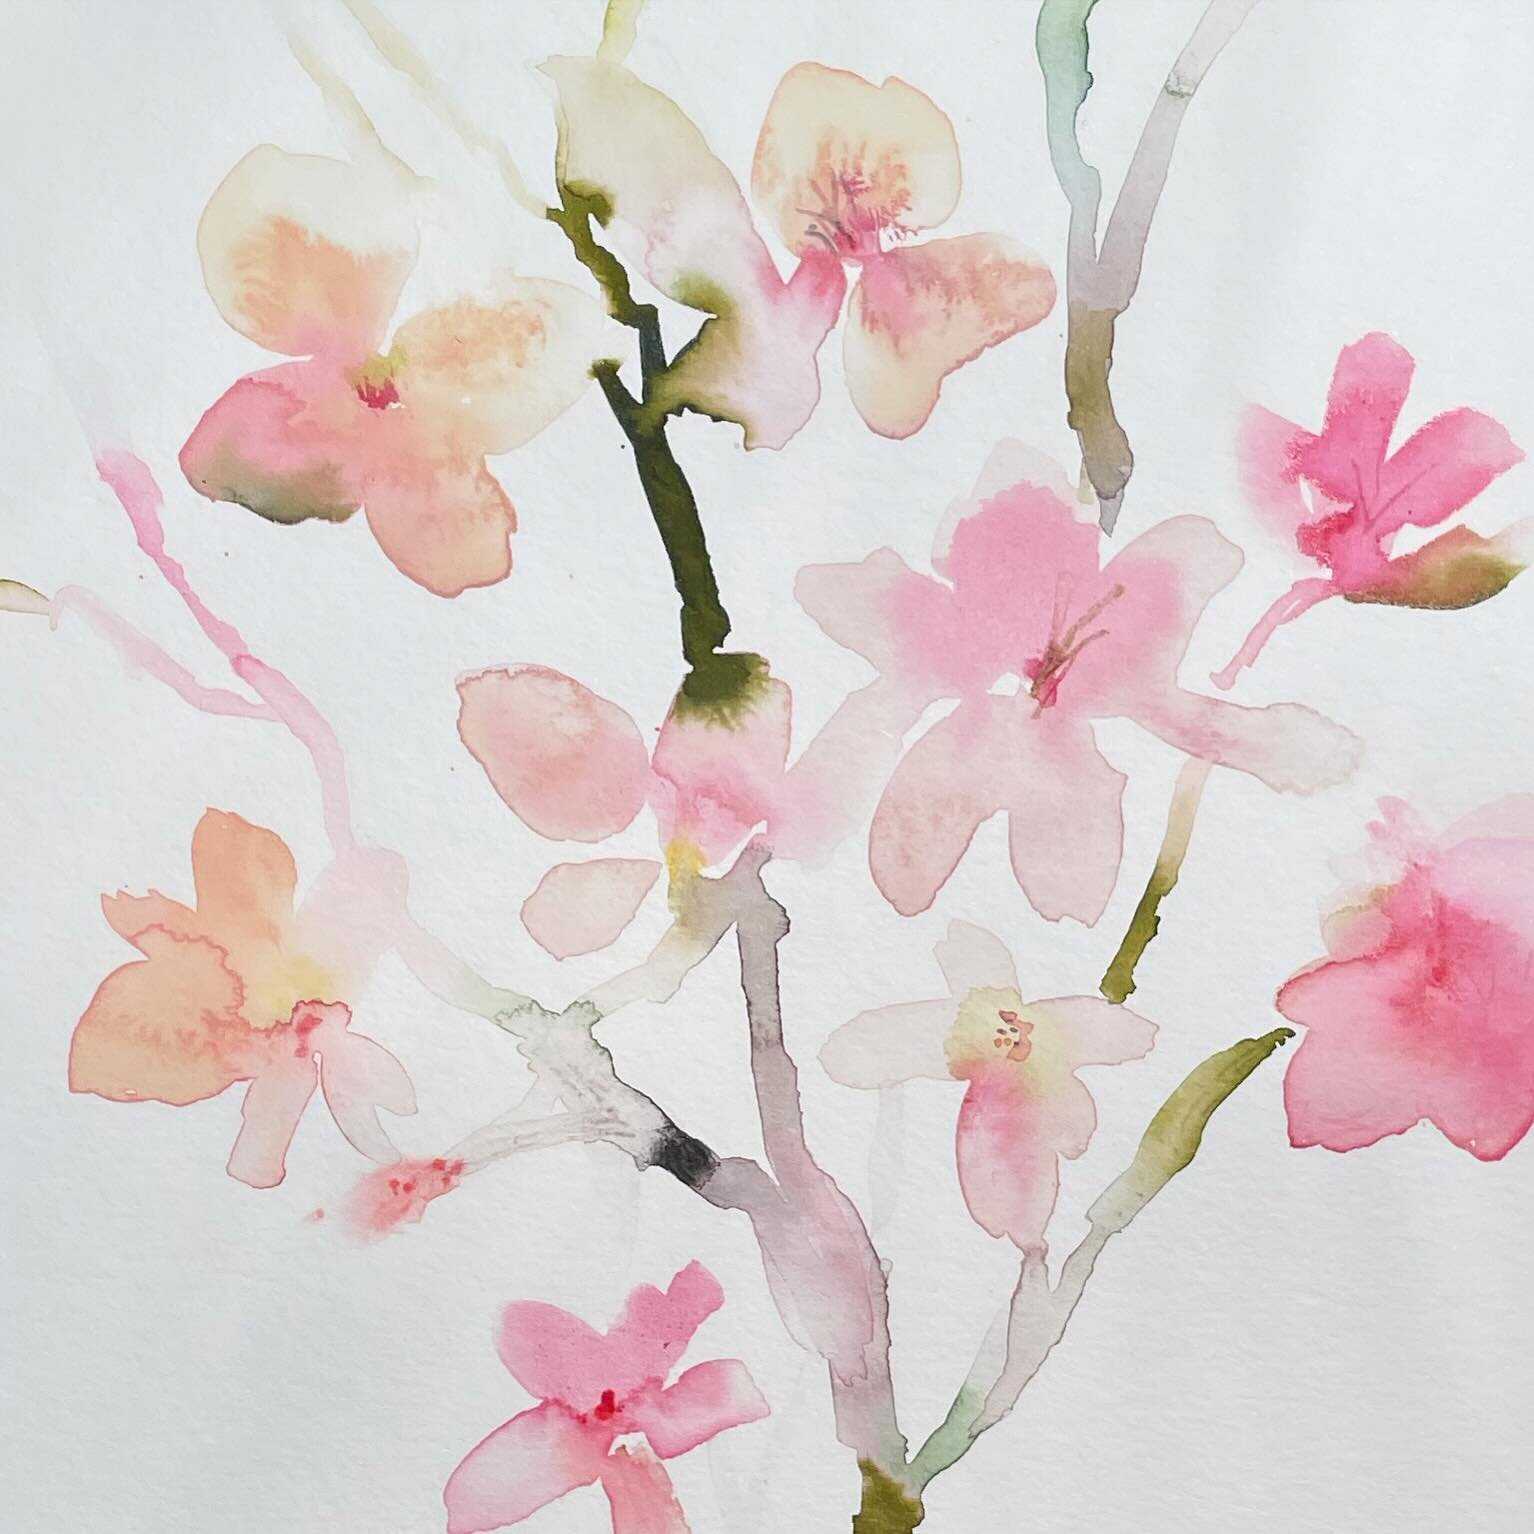 Today&rsquo;s post: cherry blossoms. Still exploring the florals of spring. 
#cherryblossom #cherryblossom #watercolorpainting #watercolors #pink #pinkflowers #pinkfloral #botanicalwatercolor #simpleflowers #watercolorart #blossoms #flowersofinstagra